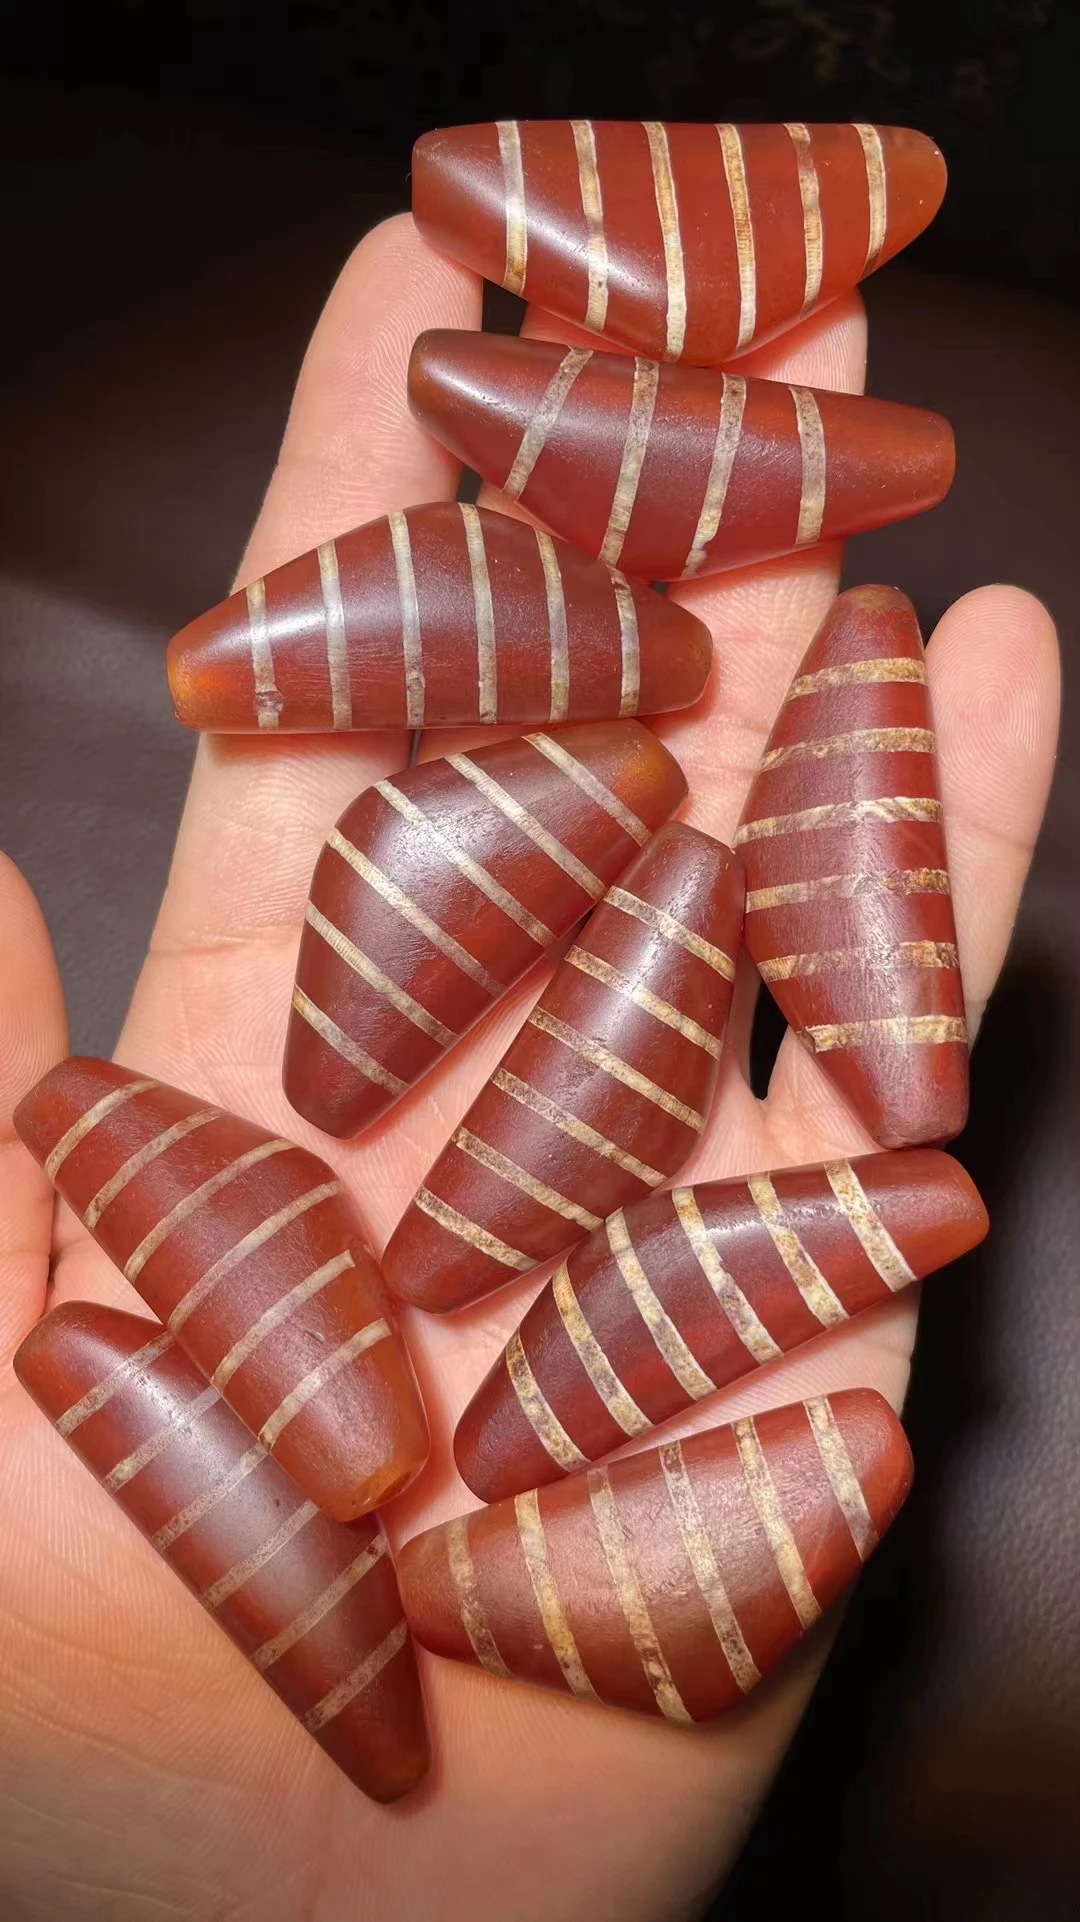 

10pcs/lots Natural Stone West Asian Cowhorn Red Strip Tibetan Dzi Beads Accessory for making Necklace DIY Tibet Beads